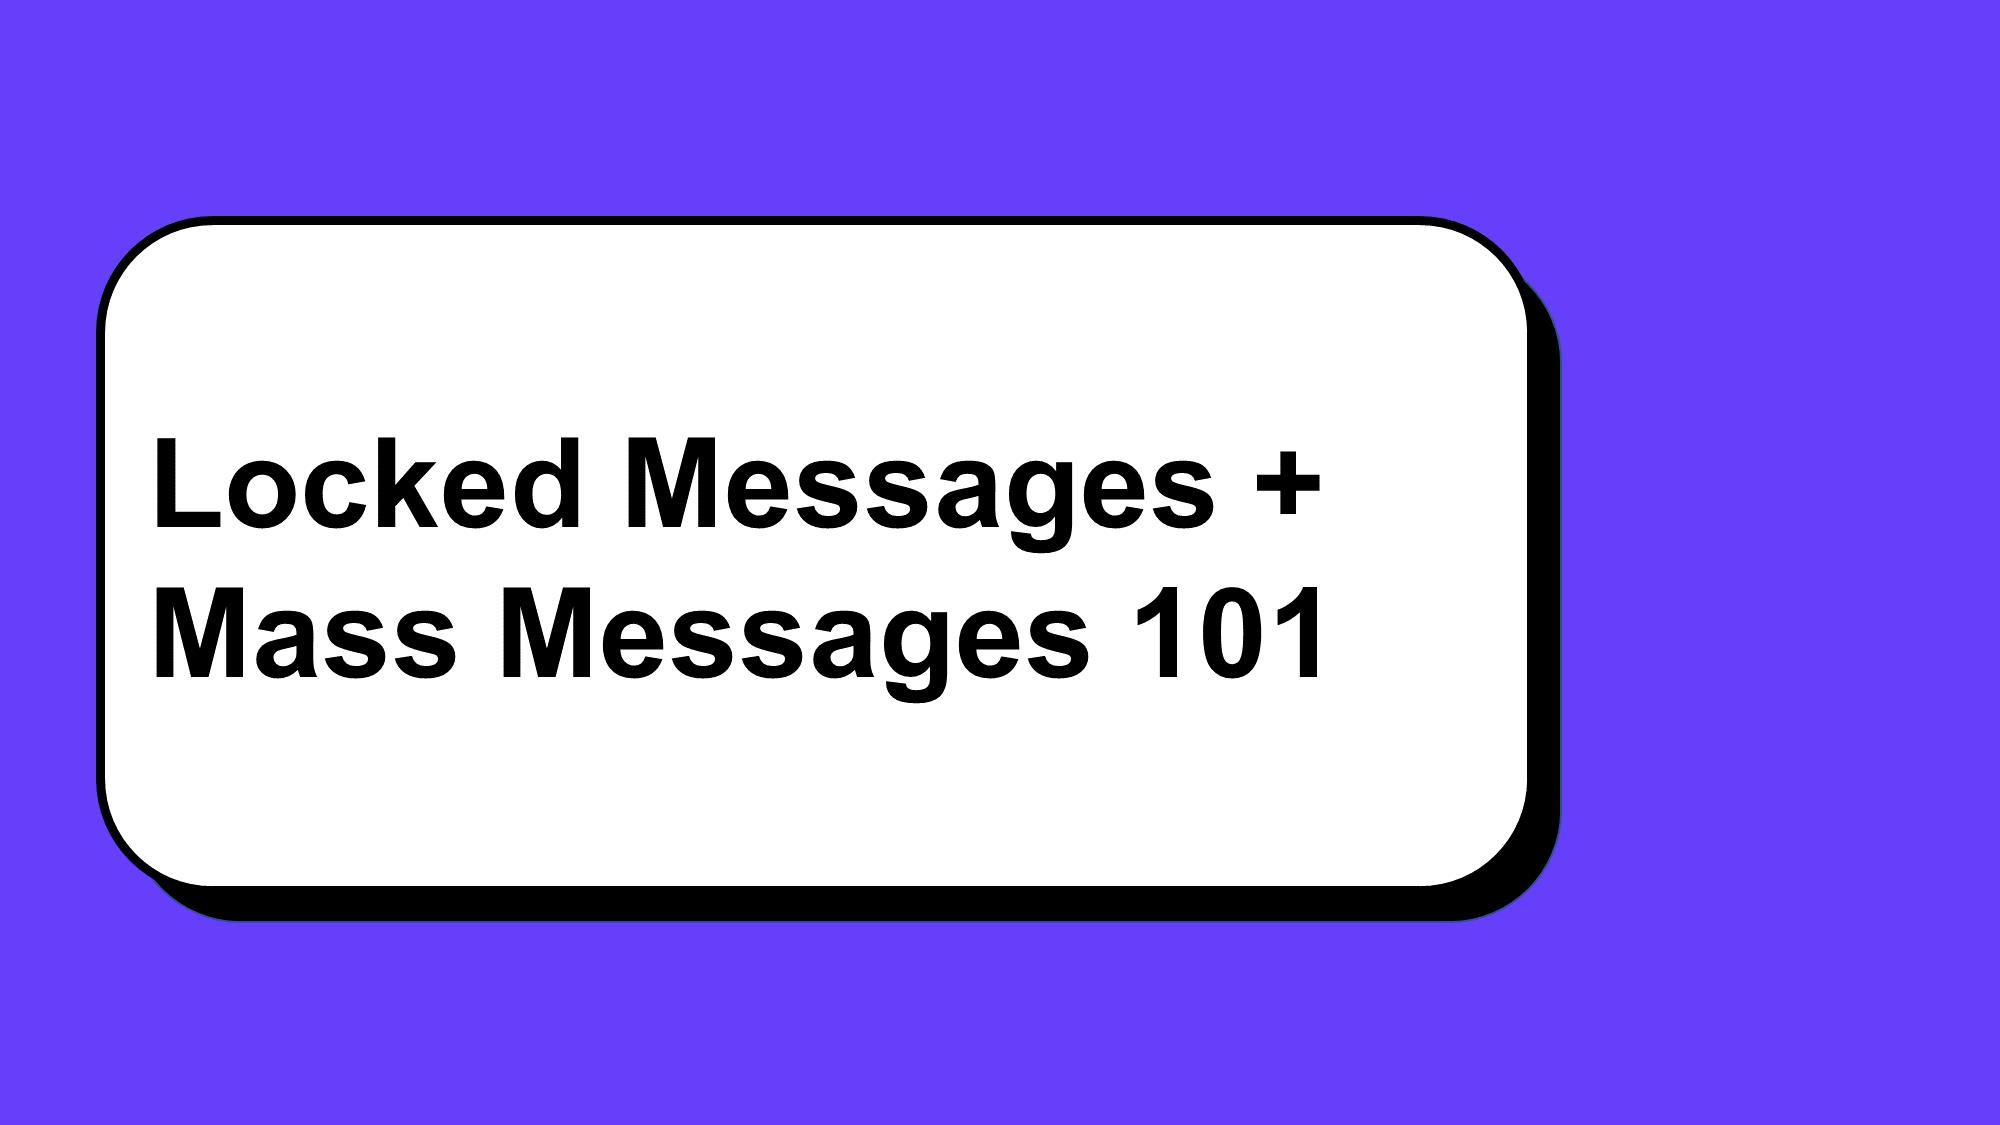 Locked Messages + Mass Messages 101